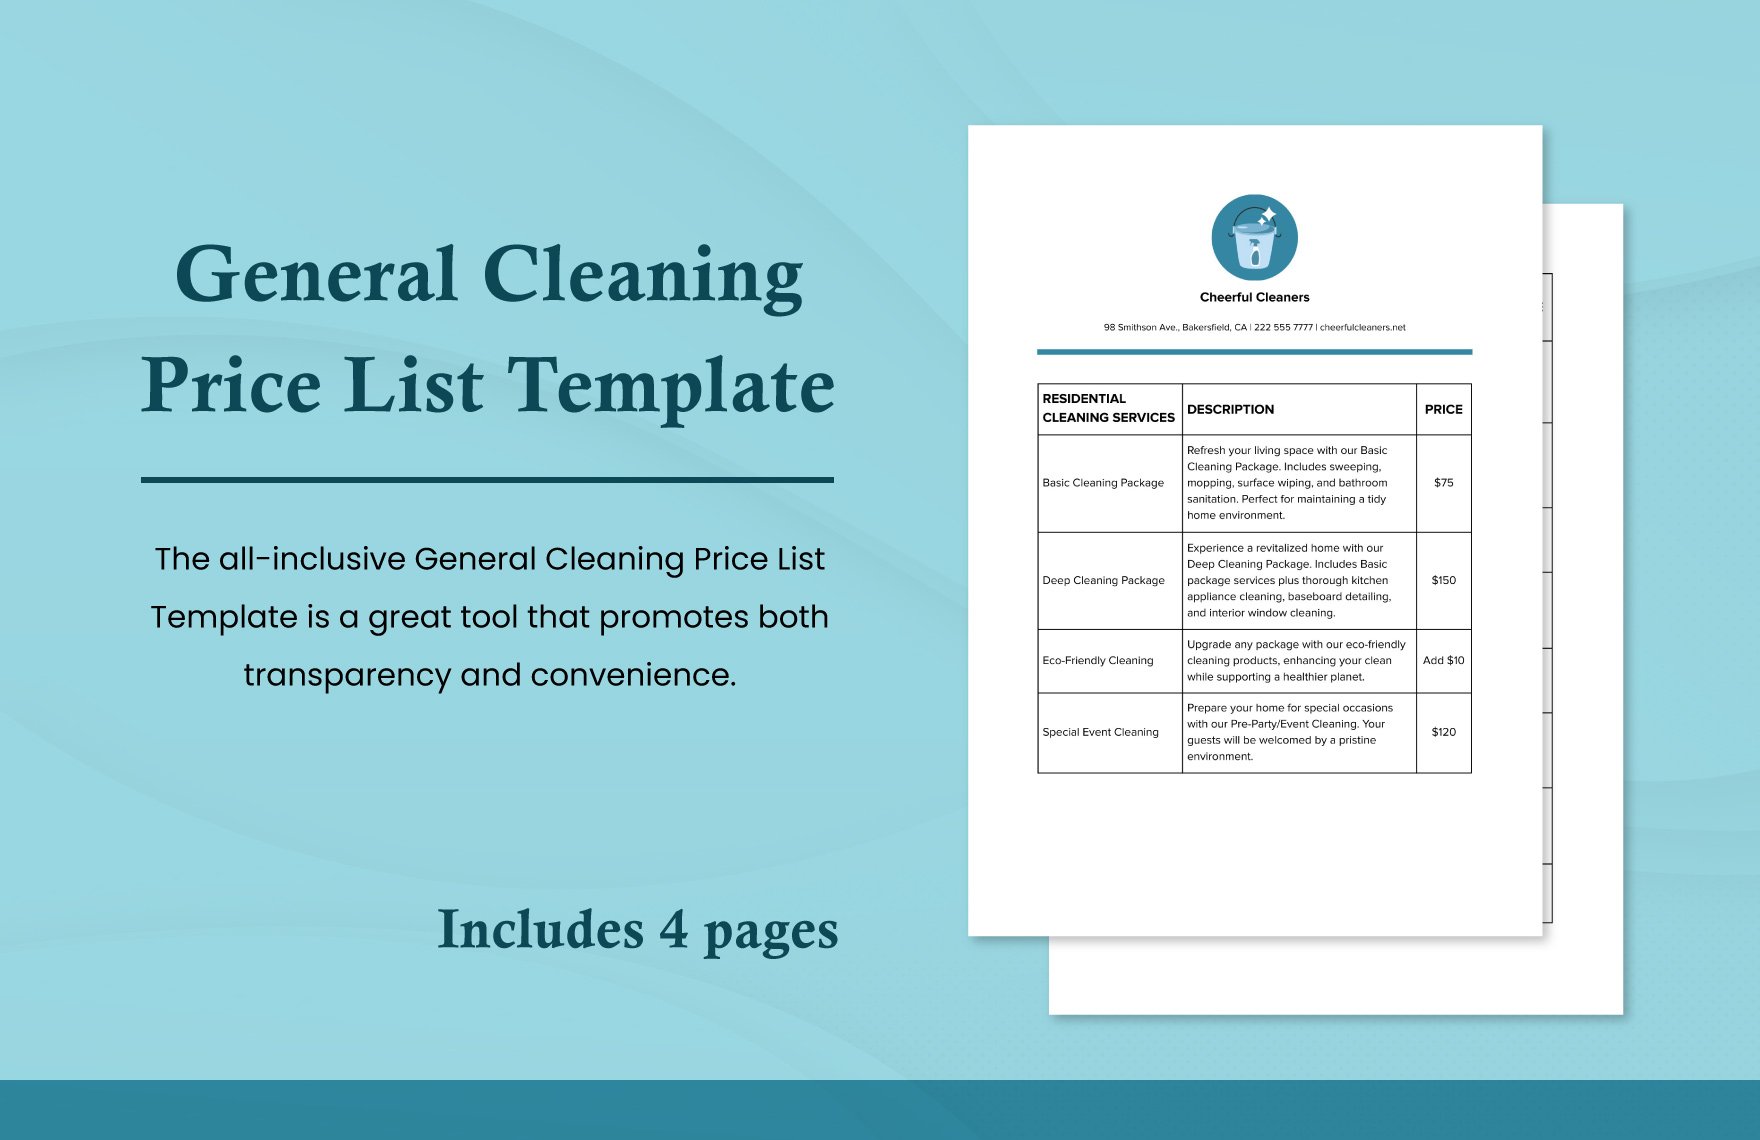 General Cleaning Price List Template